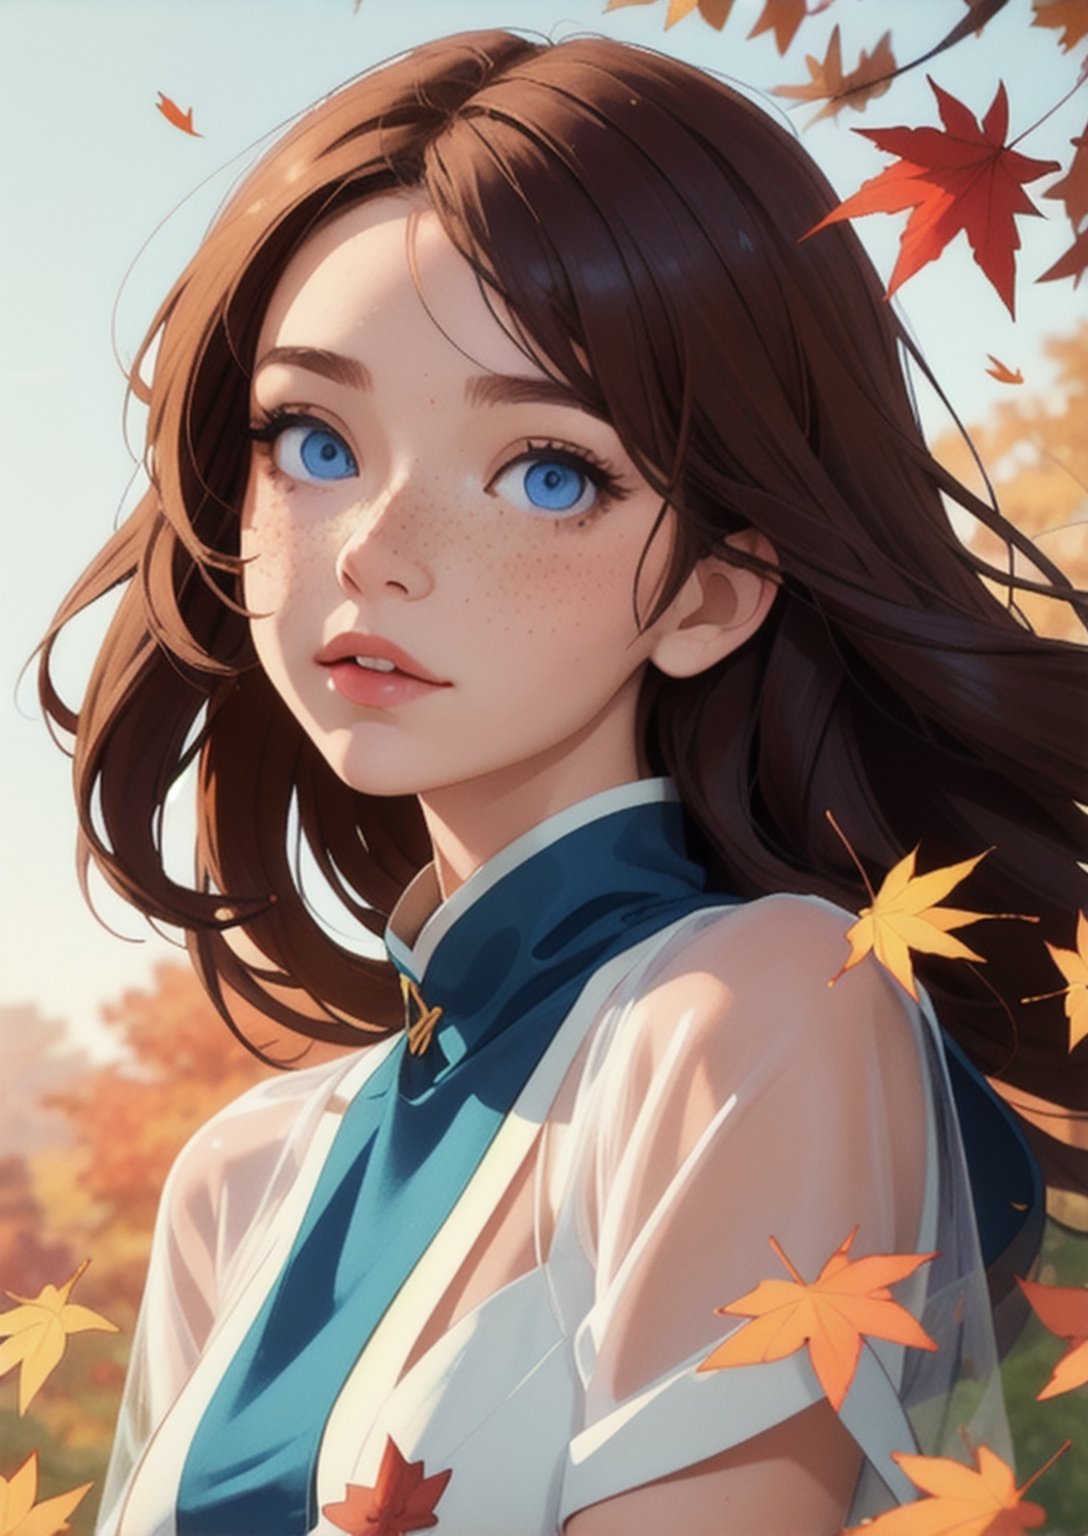 Goodbye summer, 

Masterpiece of fantasy and magical art, digital art fantasy,

Closeup autumn girl, ginger long messy hair, freckles, blue empathic eyes, double exposure, body of falling leaves, transparent and luminous, light, ethereal and floating leaves, colors of autumn,

Style as by Tom Cross,  Malgorzata Kmiec, Hiromu , Alberto Seveso